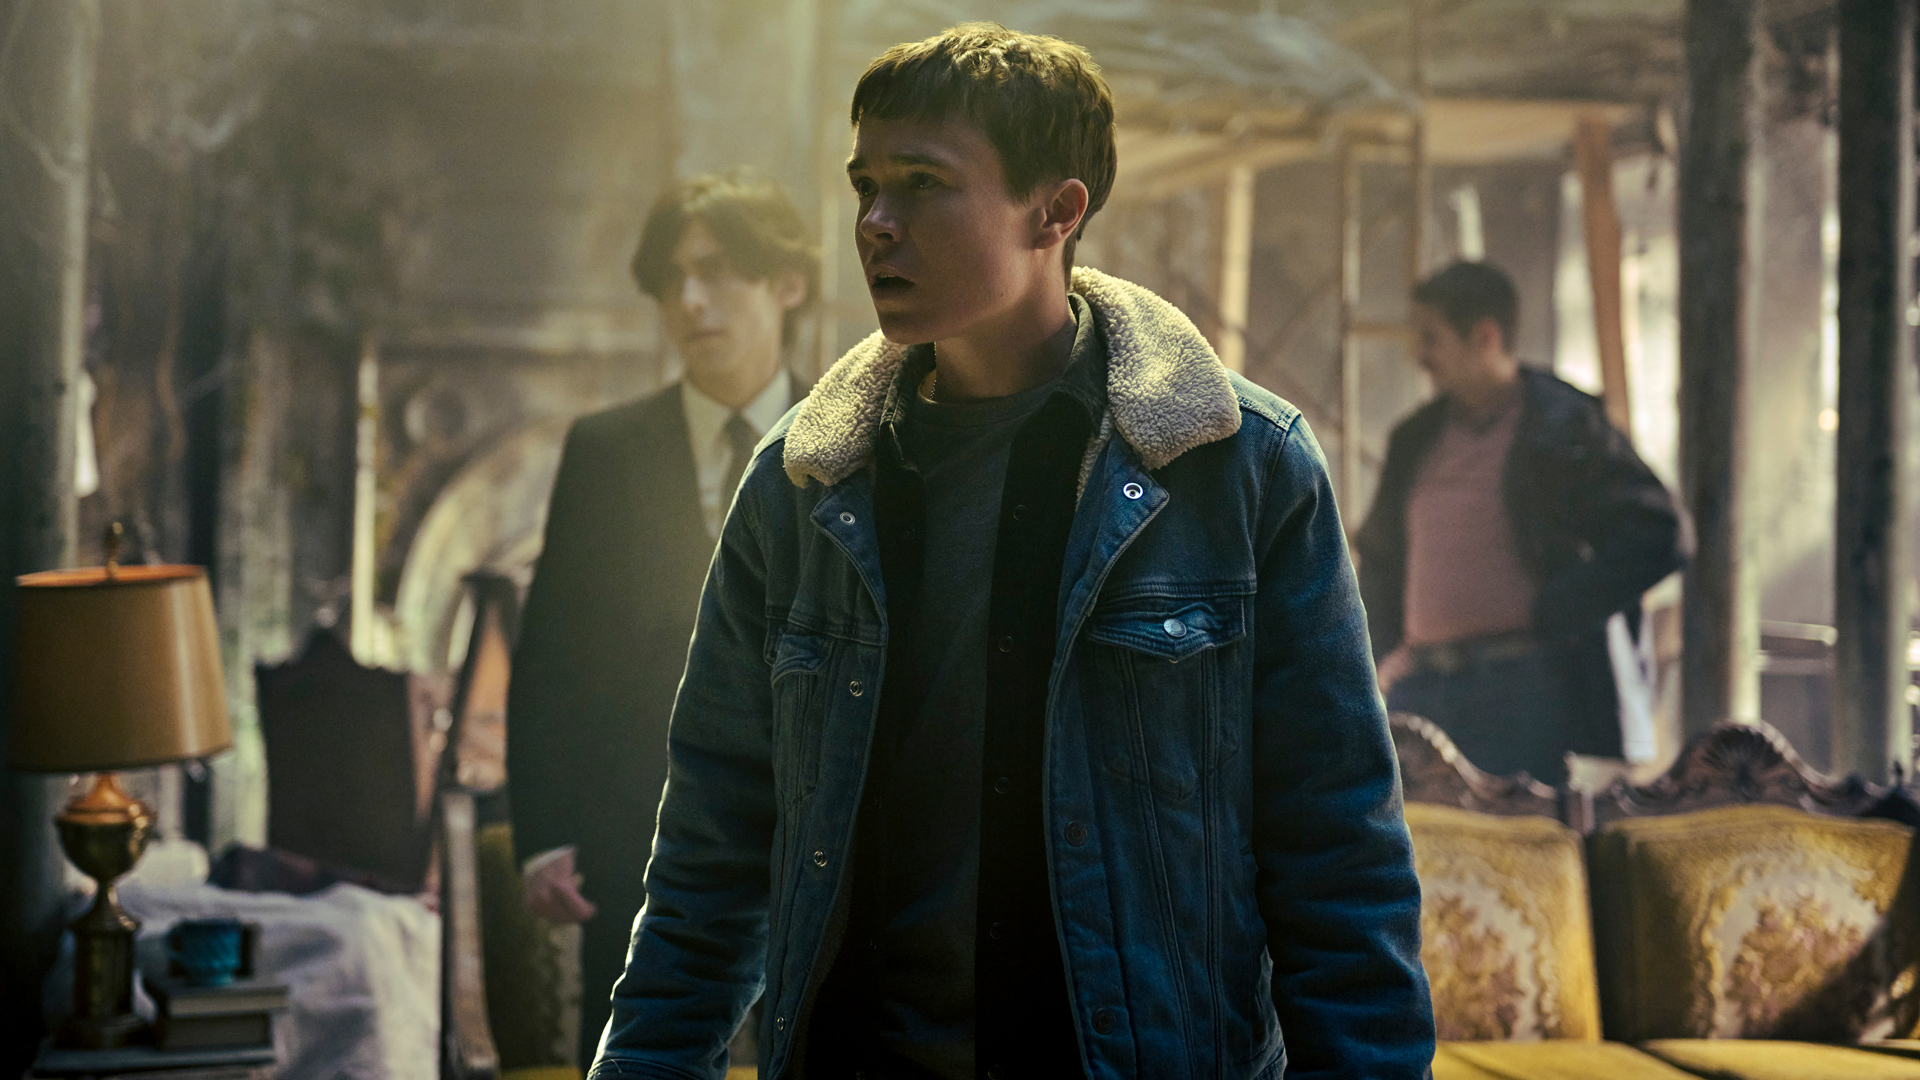 Viktor, Five and Diego inspect their ruined house in The Umbrella Academy season 4